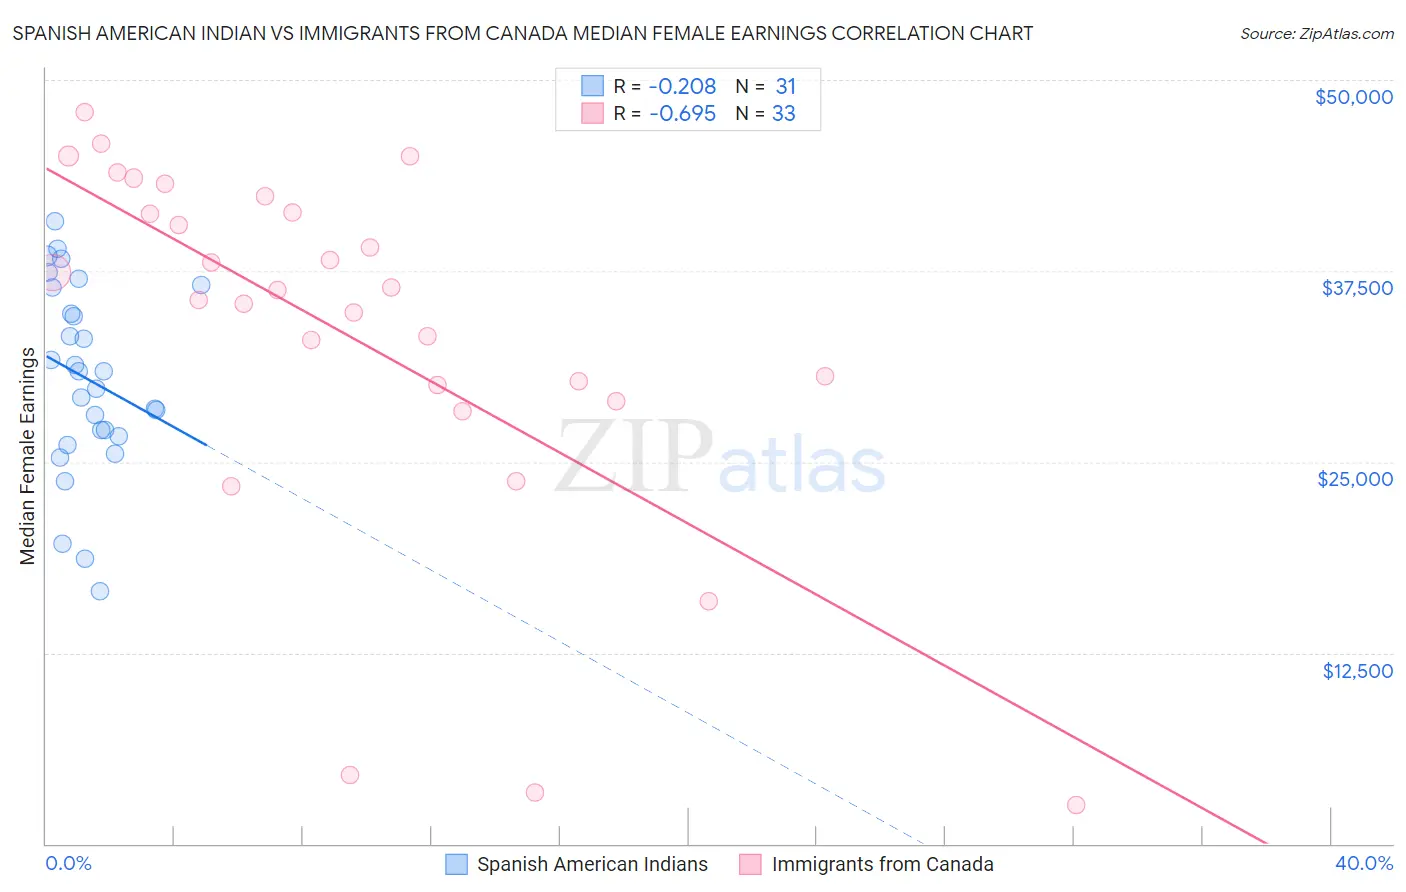 Spanish American Indian vs Immigrants from Canada Median Female Earnings